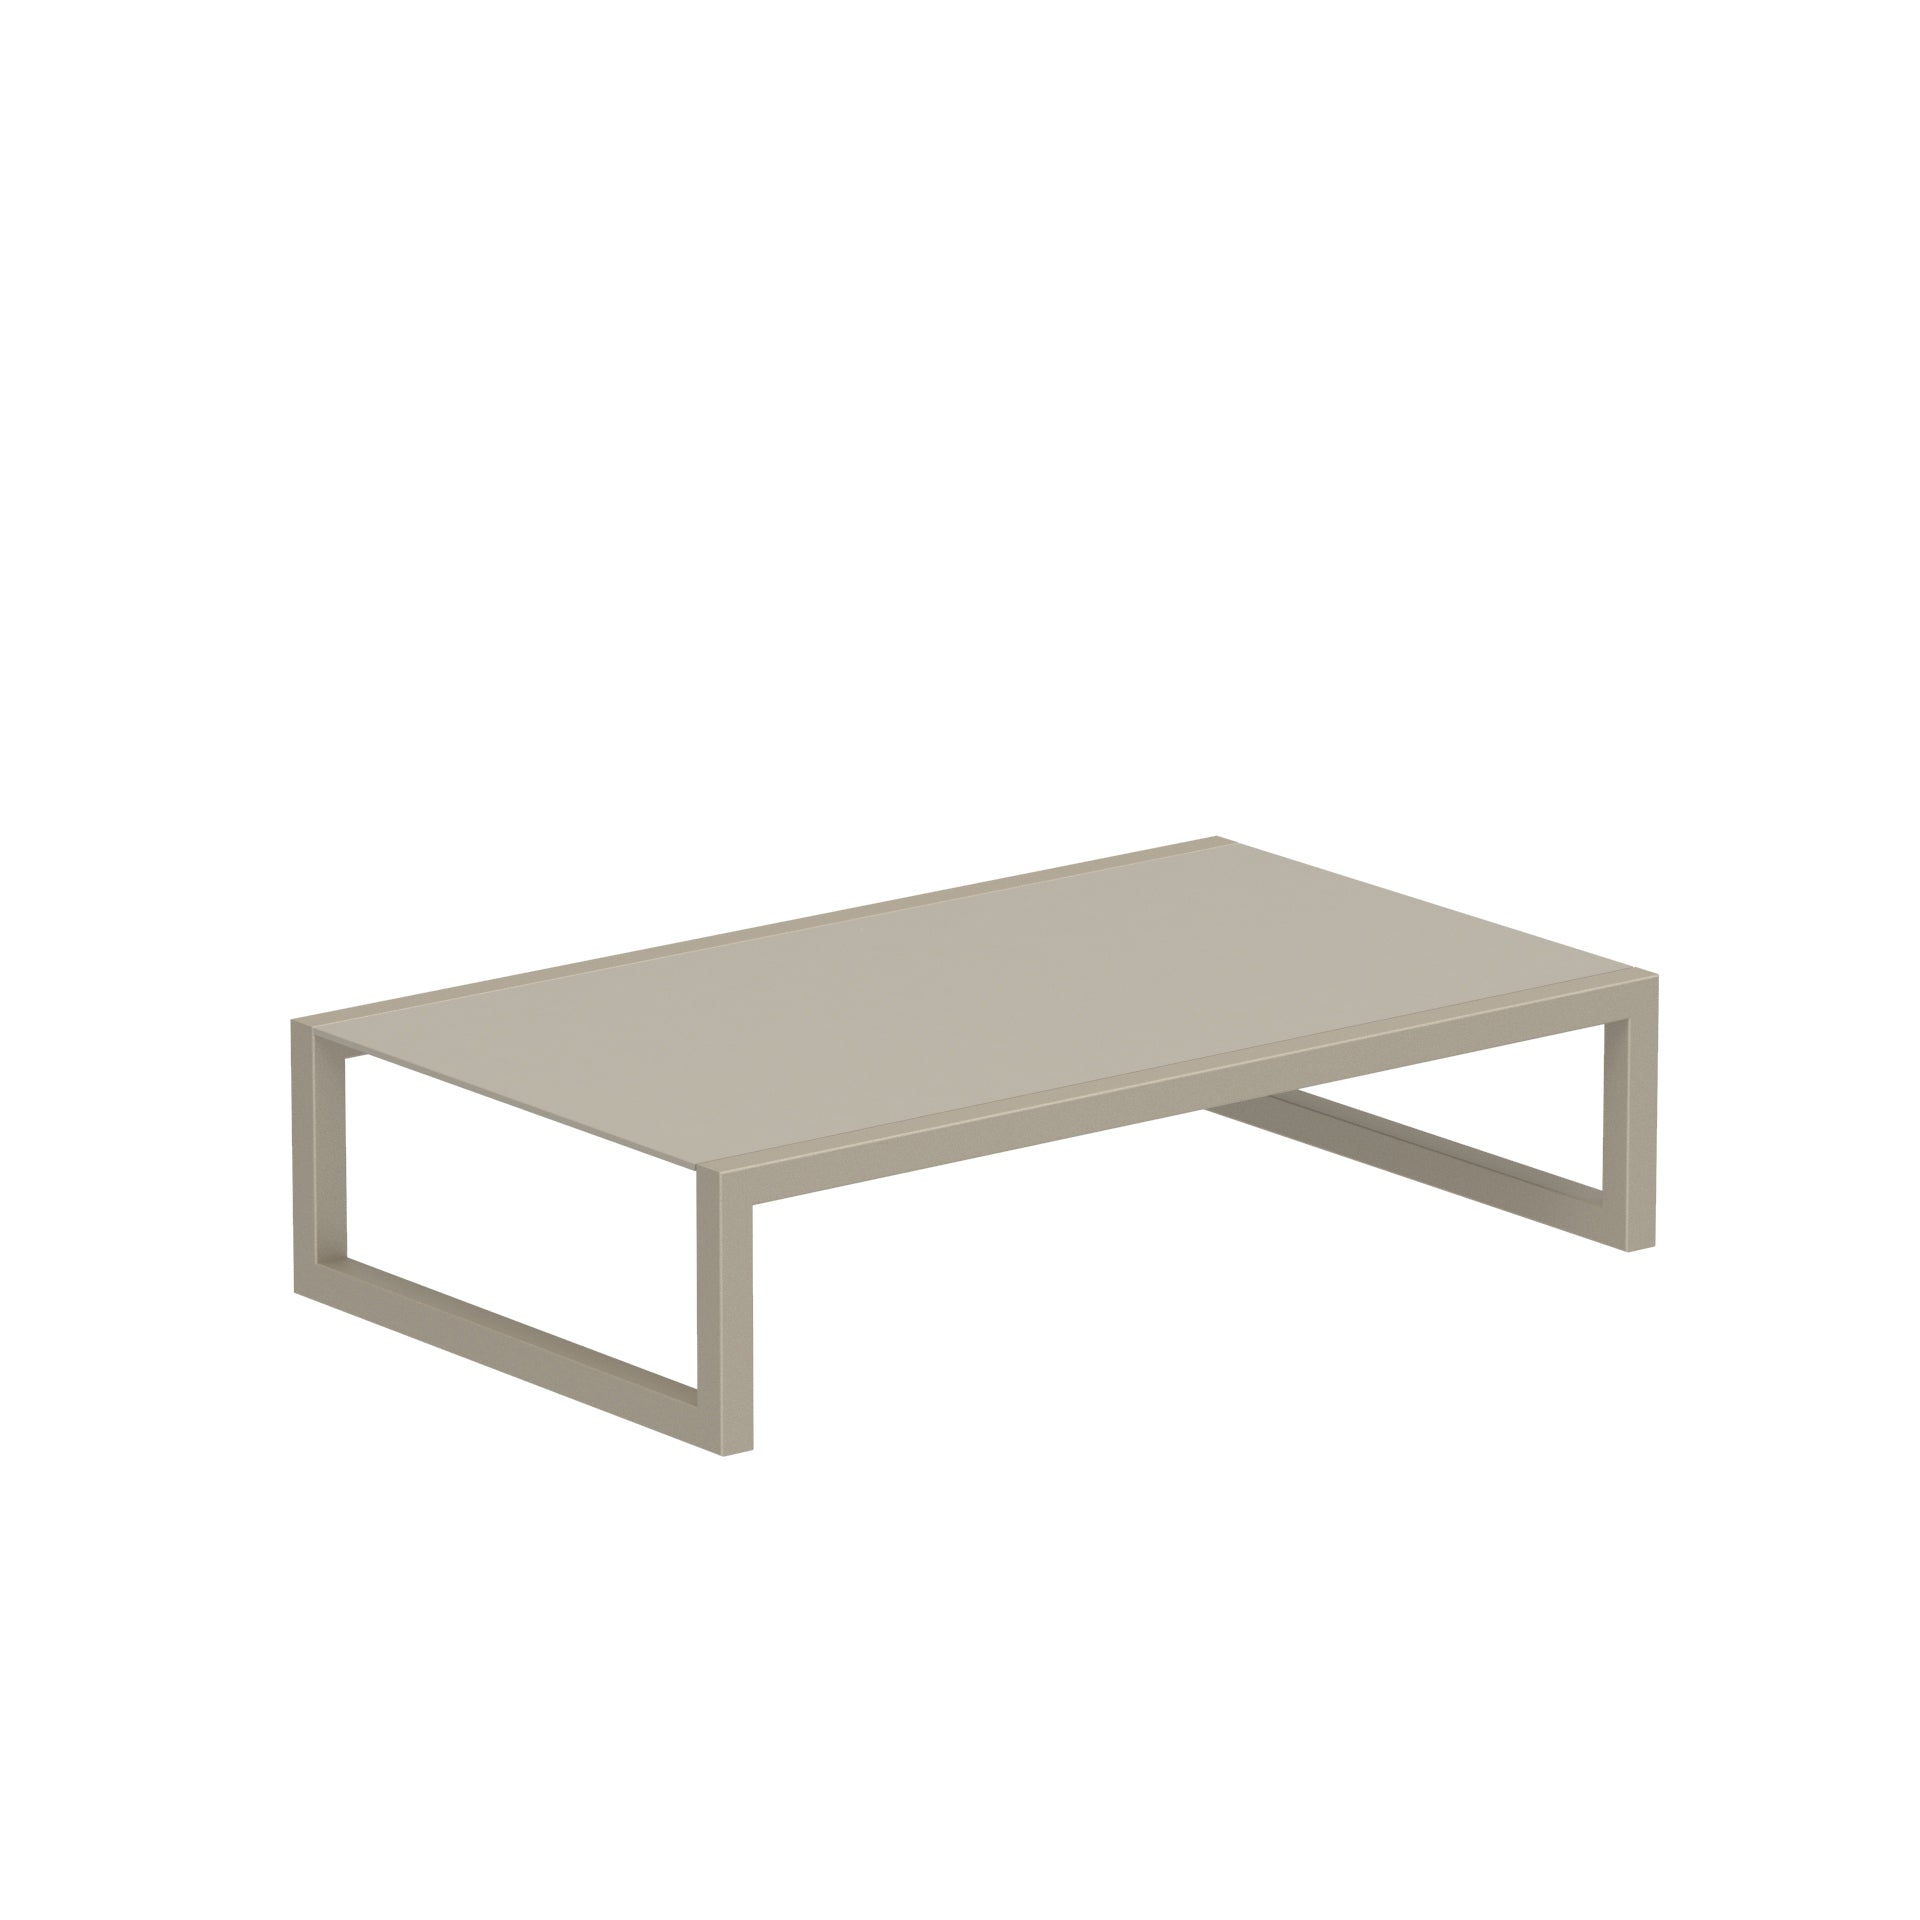 Ninix Powder-coated Low Table in Sand